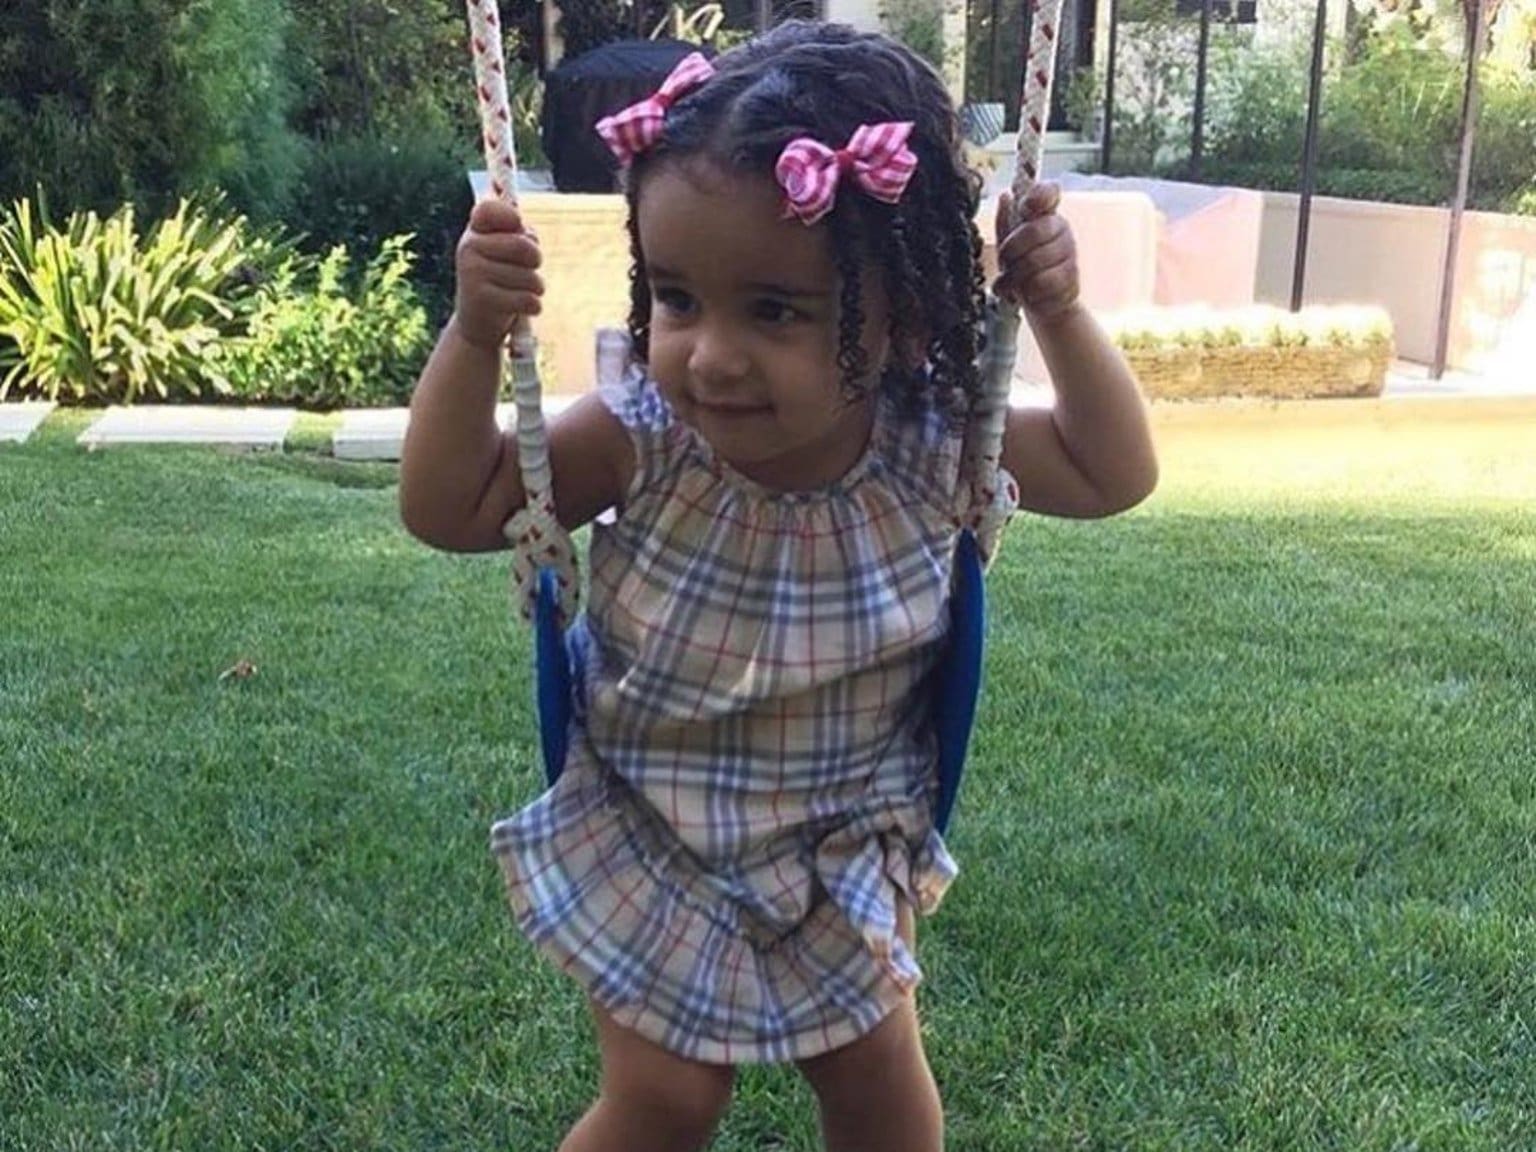 Blac Chyna's Daughter, Dream Kardashian Is Having The Best Time With Khloe's Baby Girl, True Thompson - These Two Girls Will Melt Your Heart